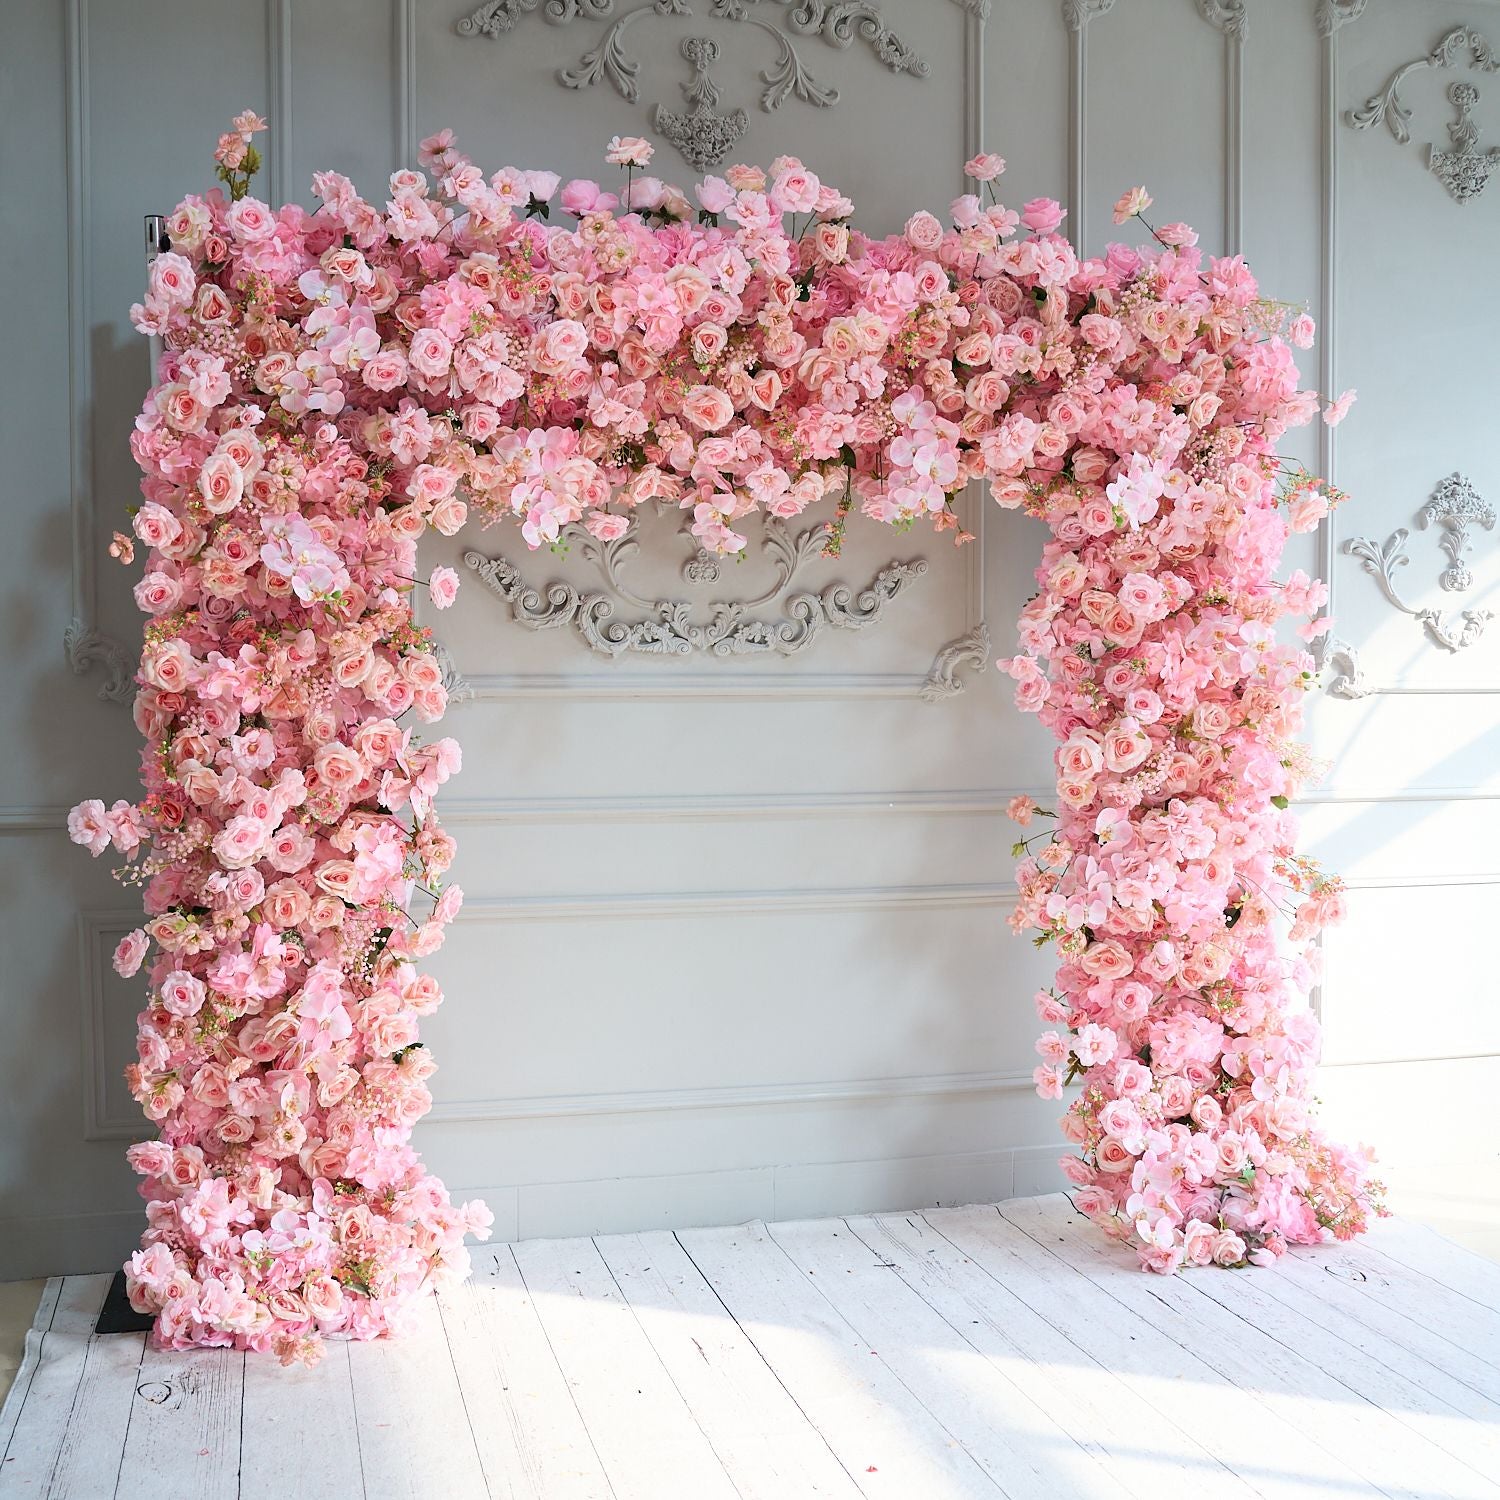 Flower Arch 8x8ft Pink Roses Florals Set Fabric Backdrop Flower Wall Proposal Wedding Party Decor